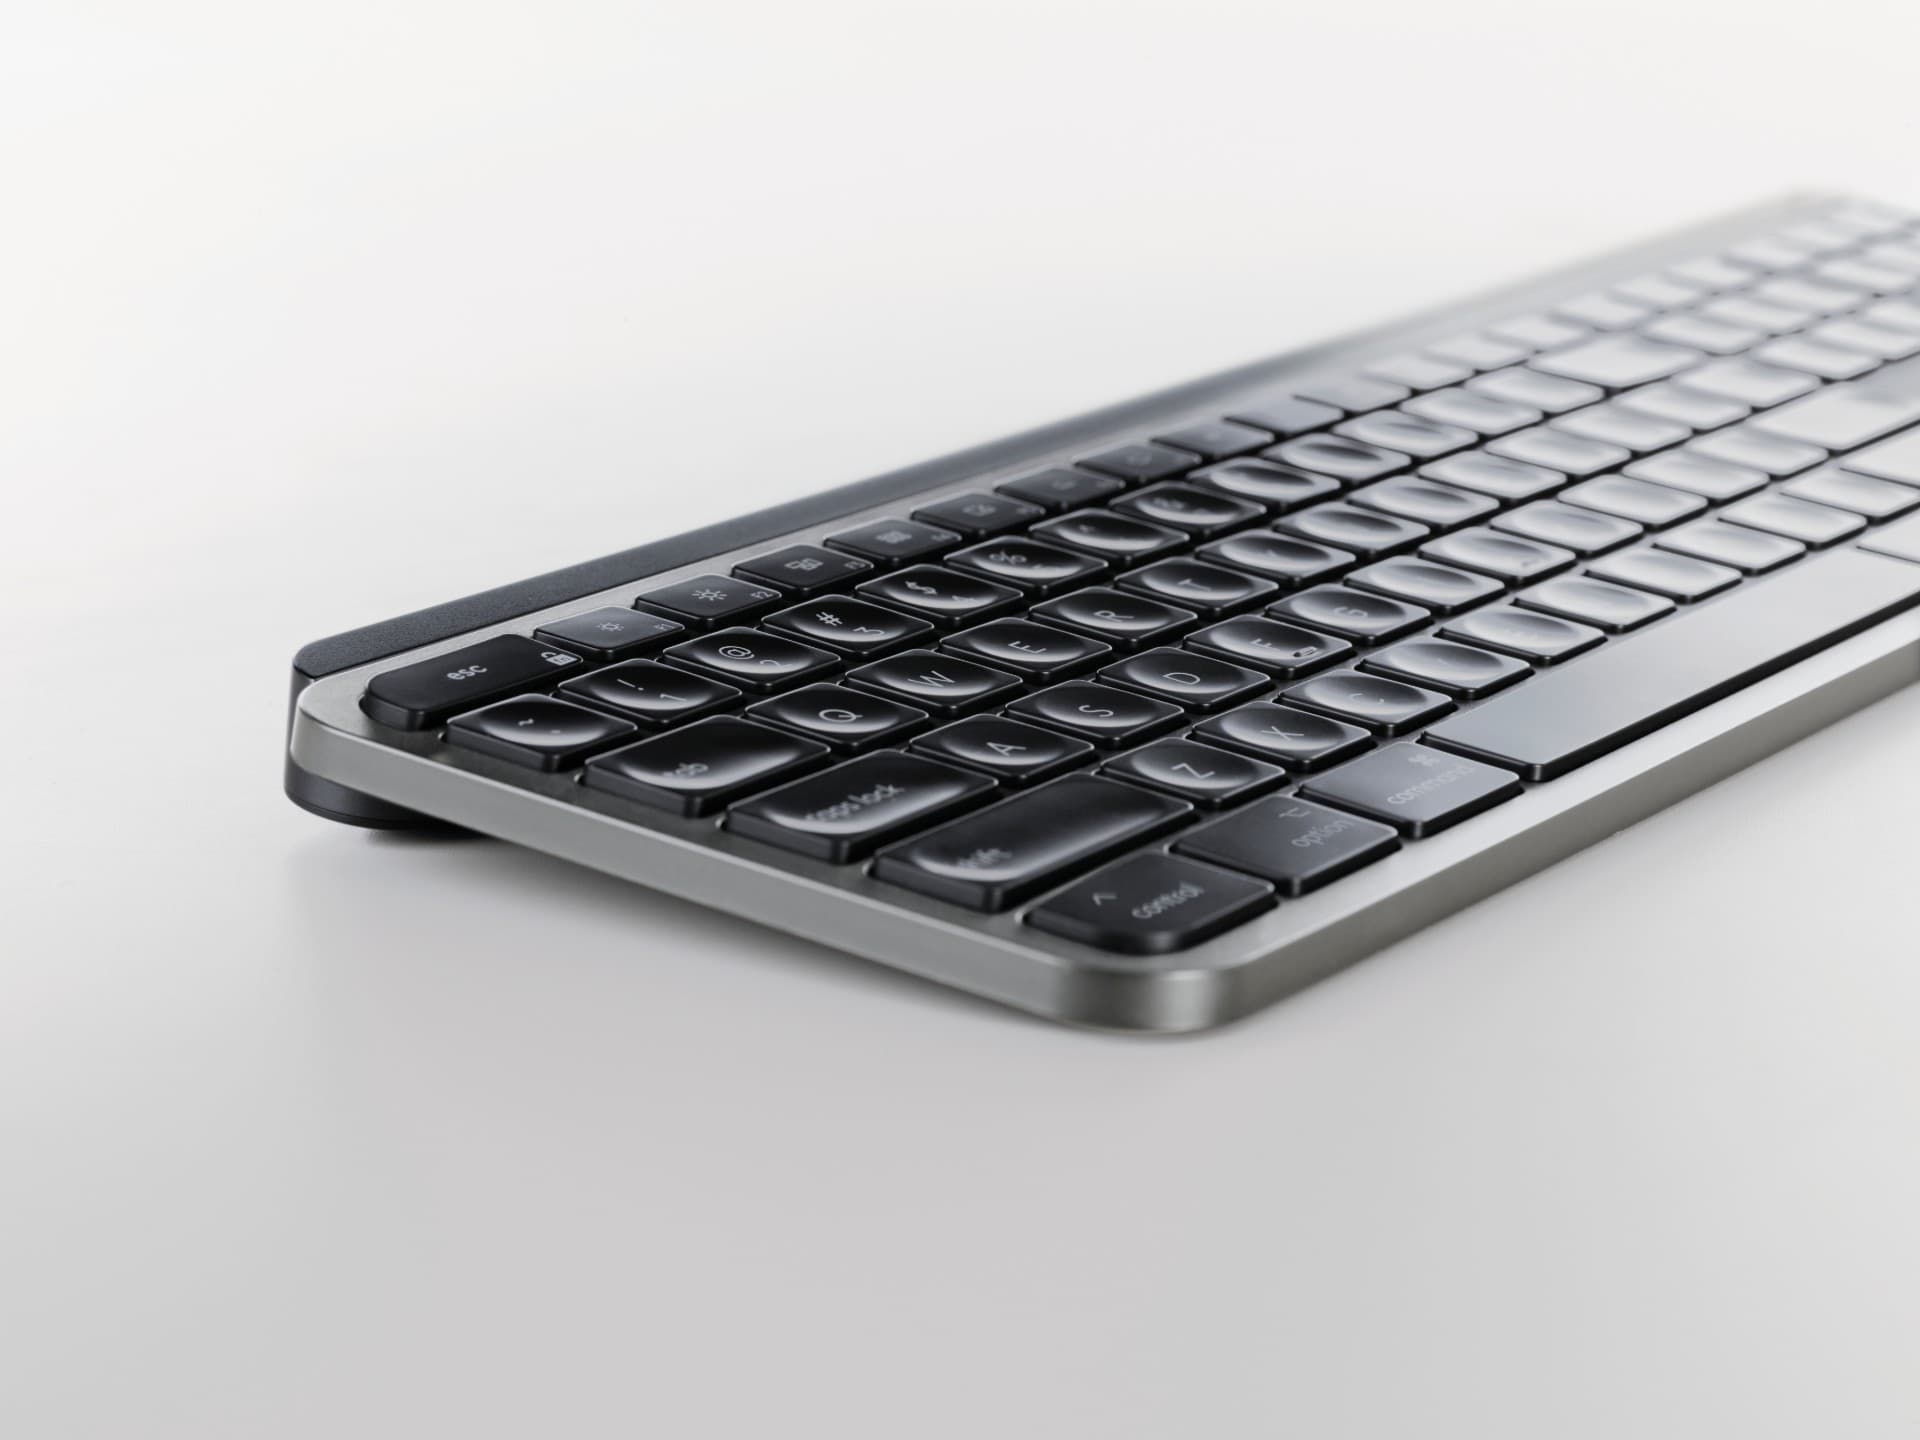 MX Keys for Mac looks gorgeous in space gray (and the keys are in the right spots).